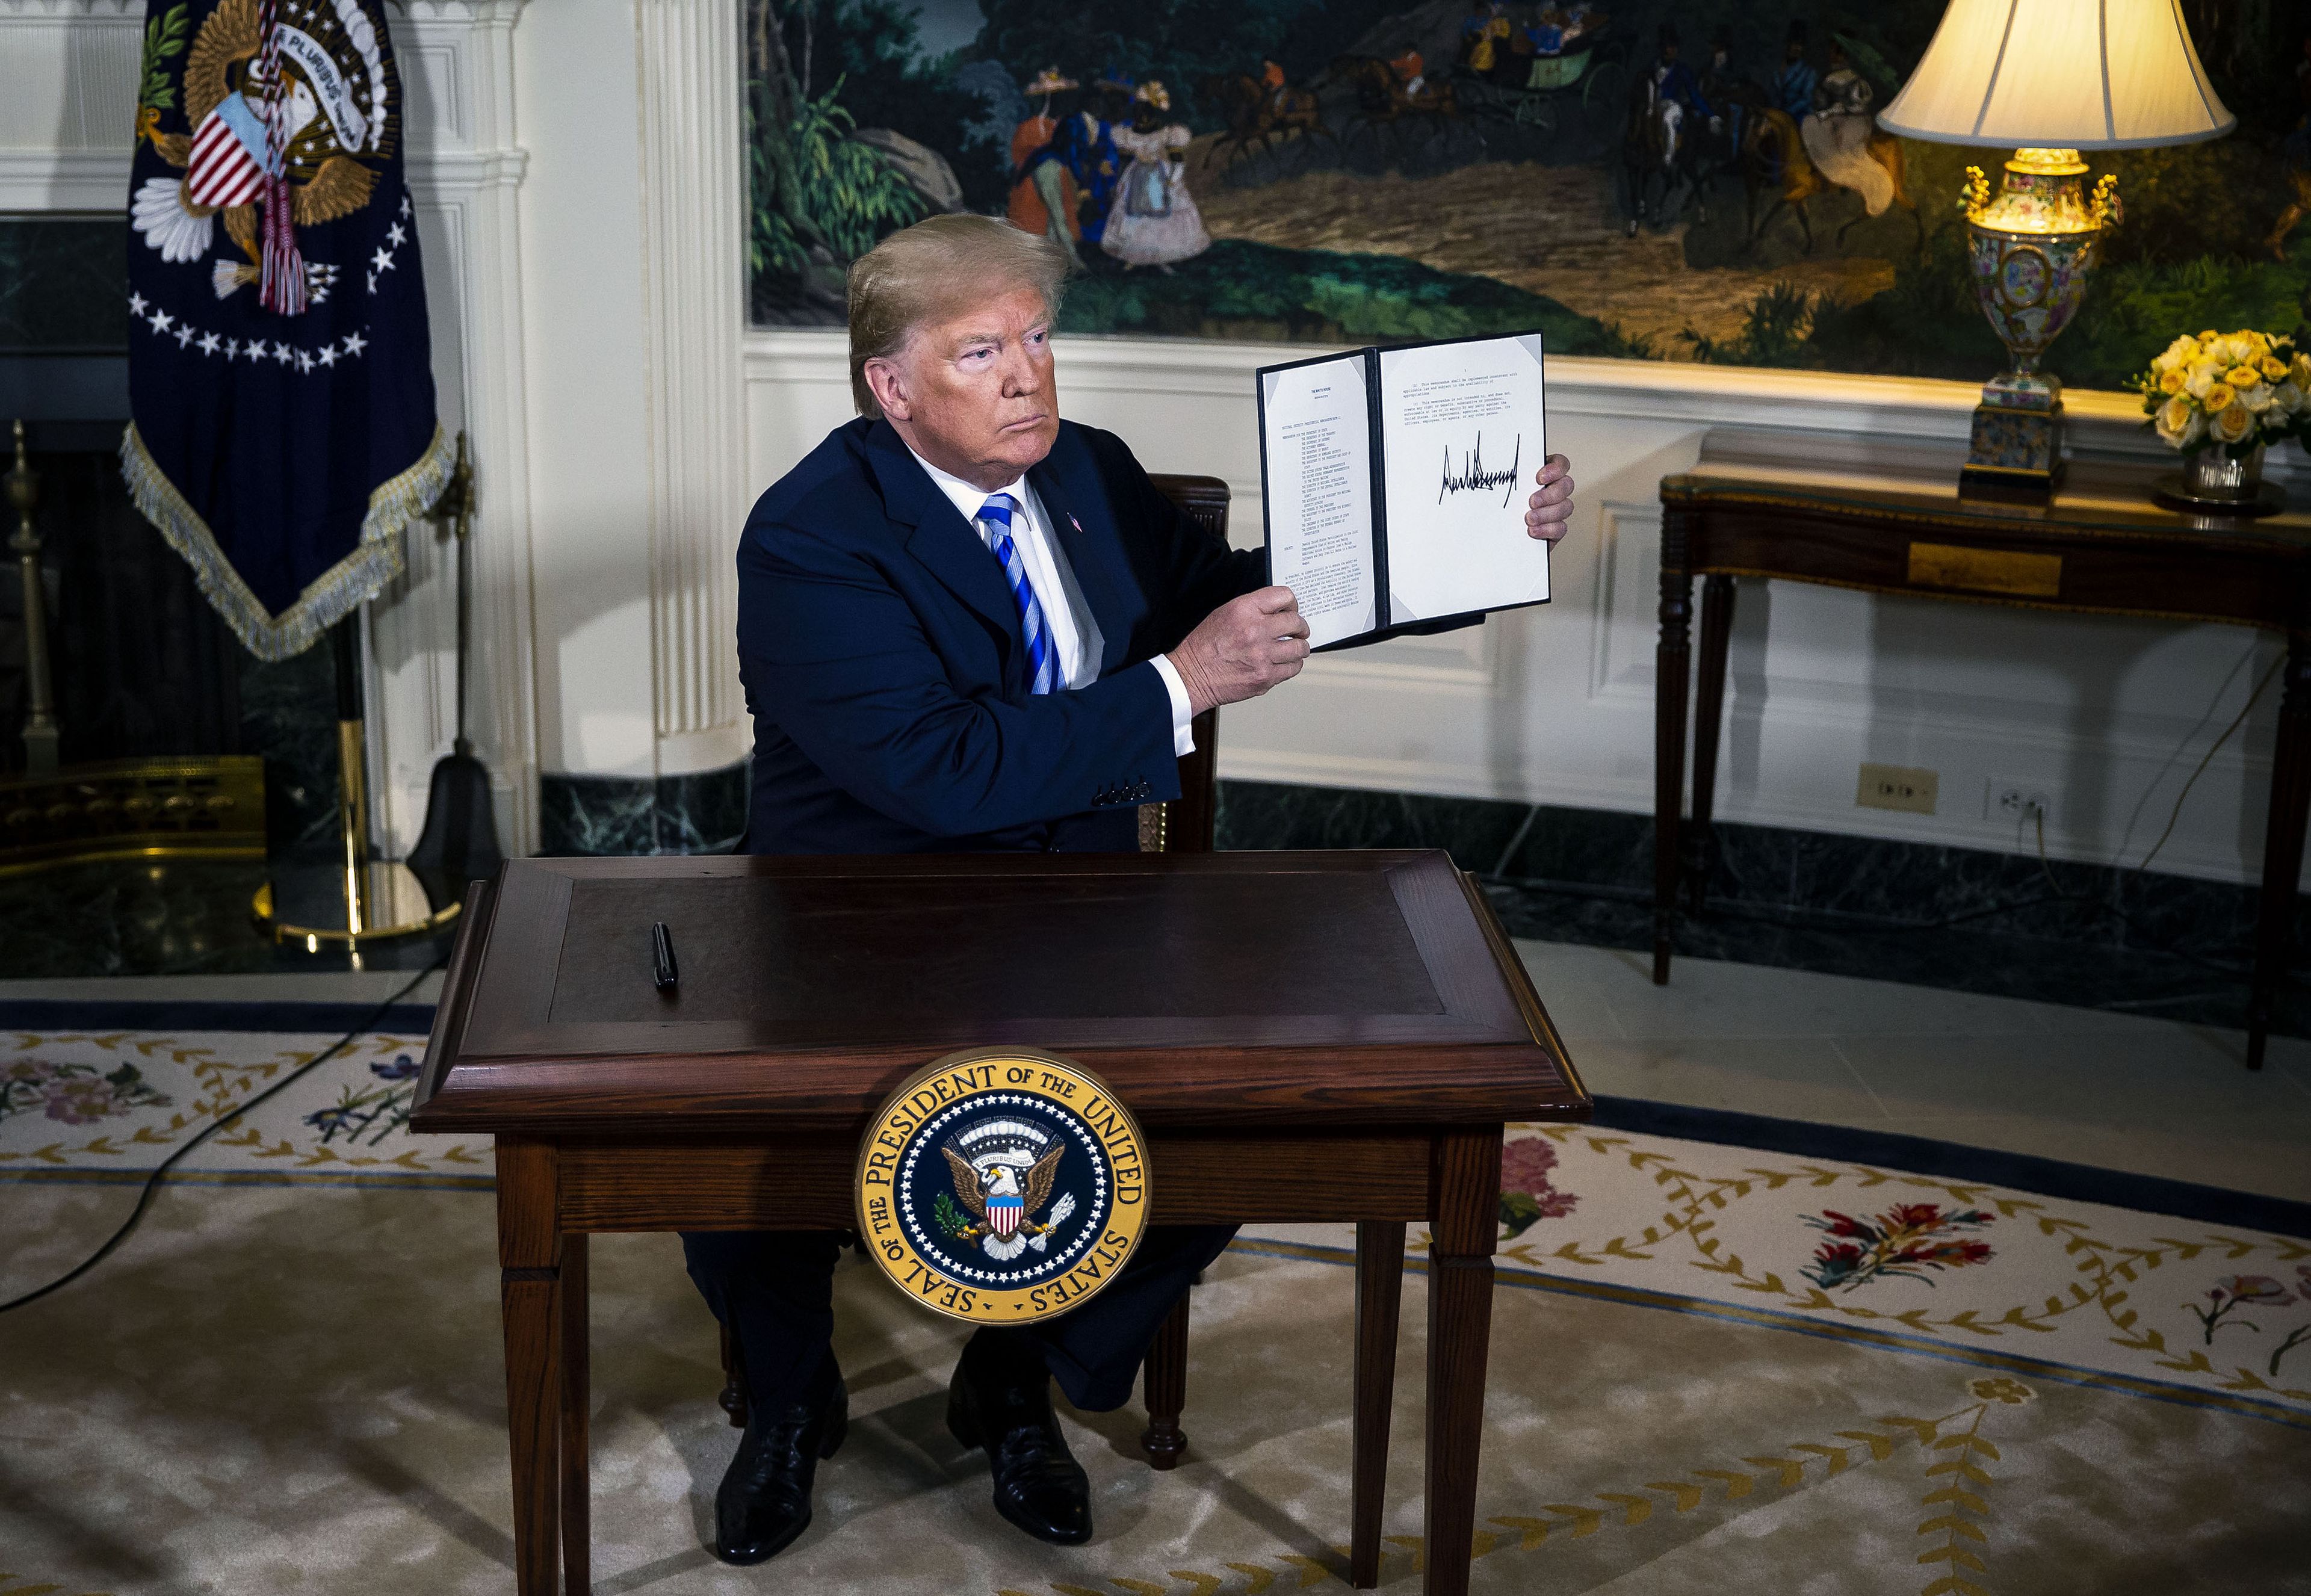 President Trump Announces Exit From Iran Nuclear Deal And Reinstating Of Sanctions